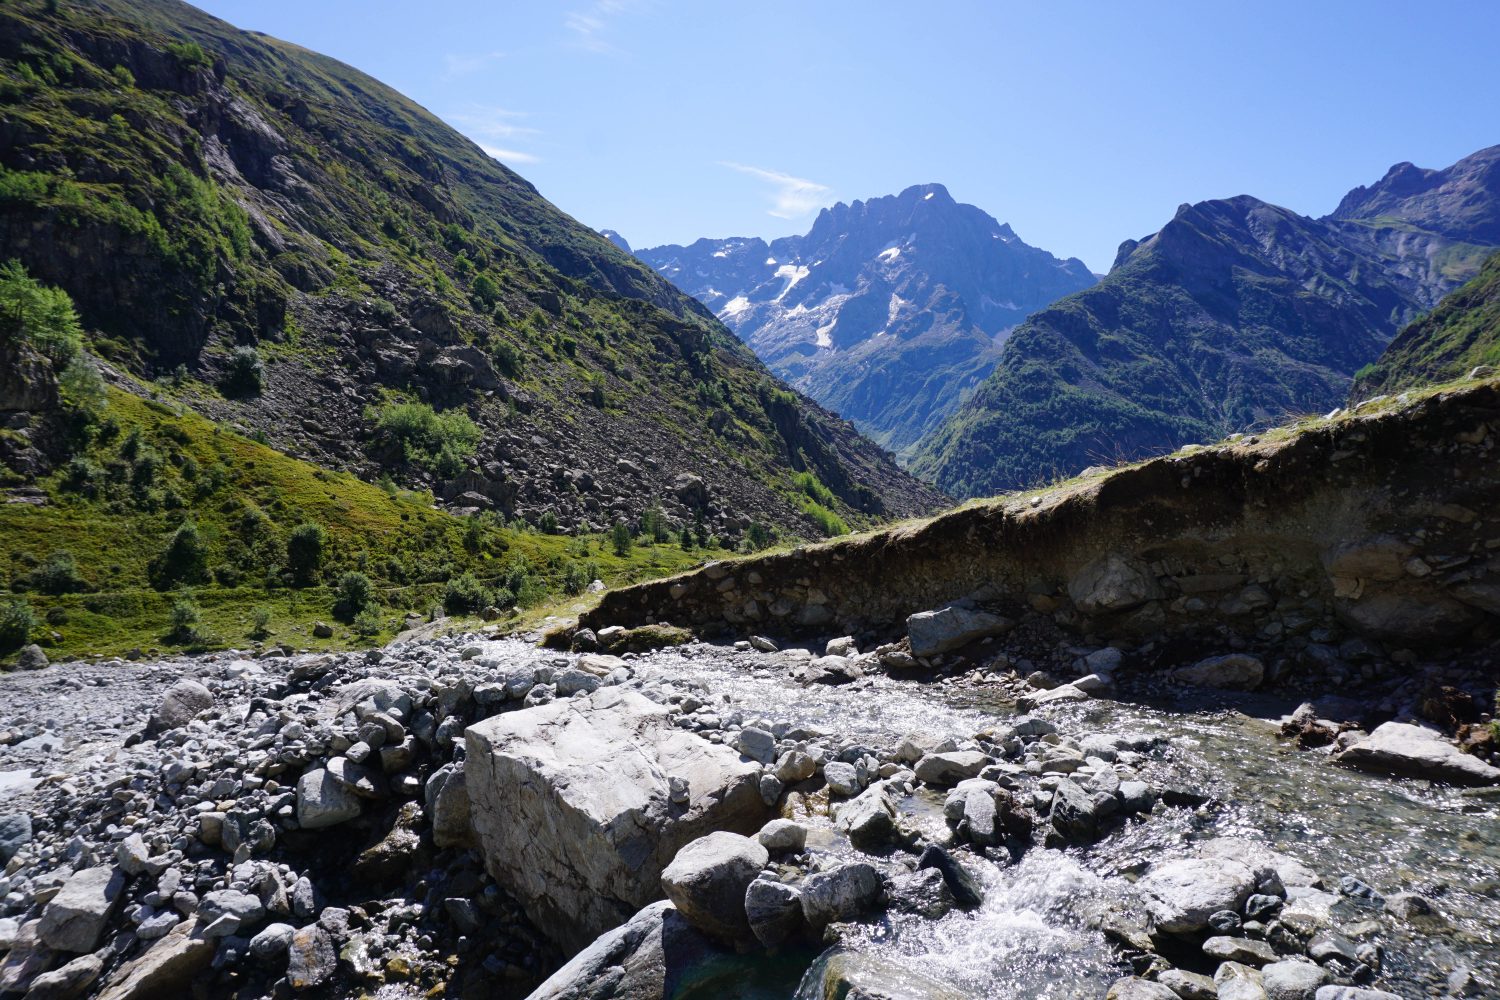 Ecrins National Park - Hiking in the French Alps